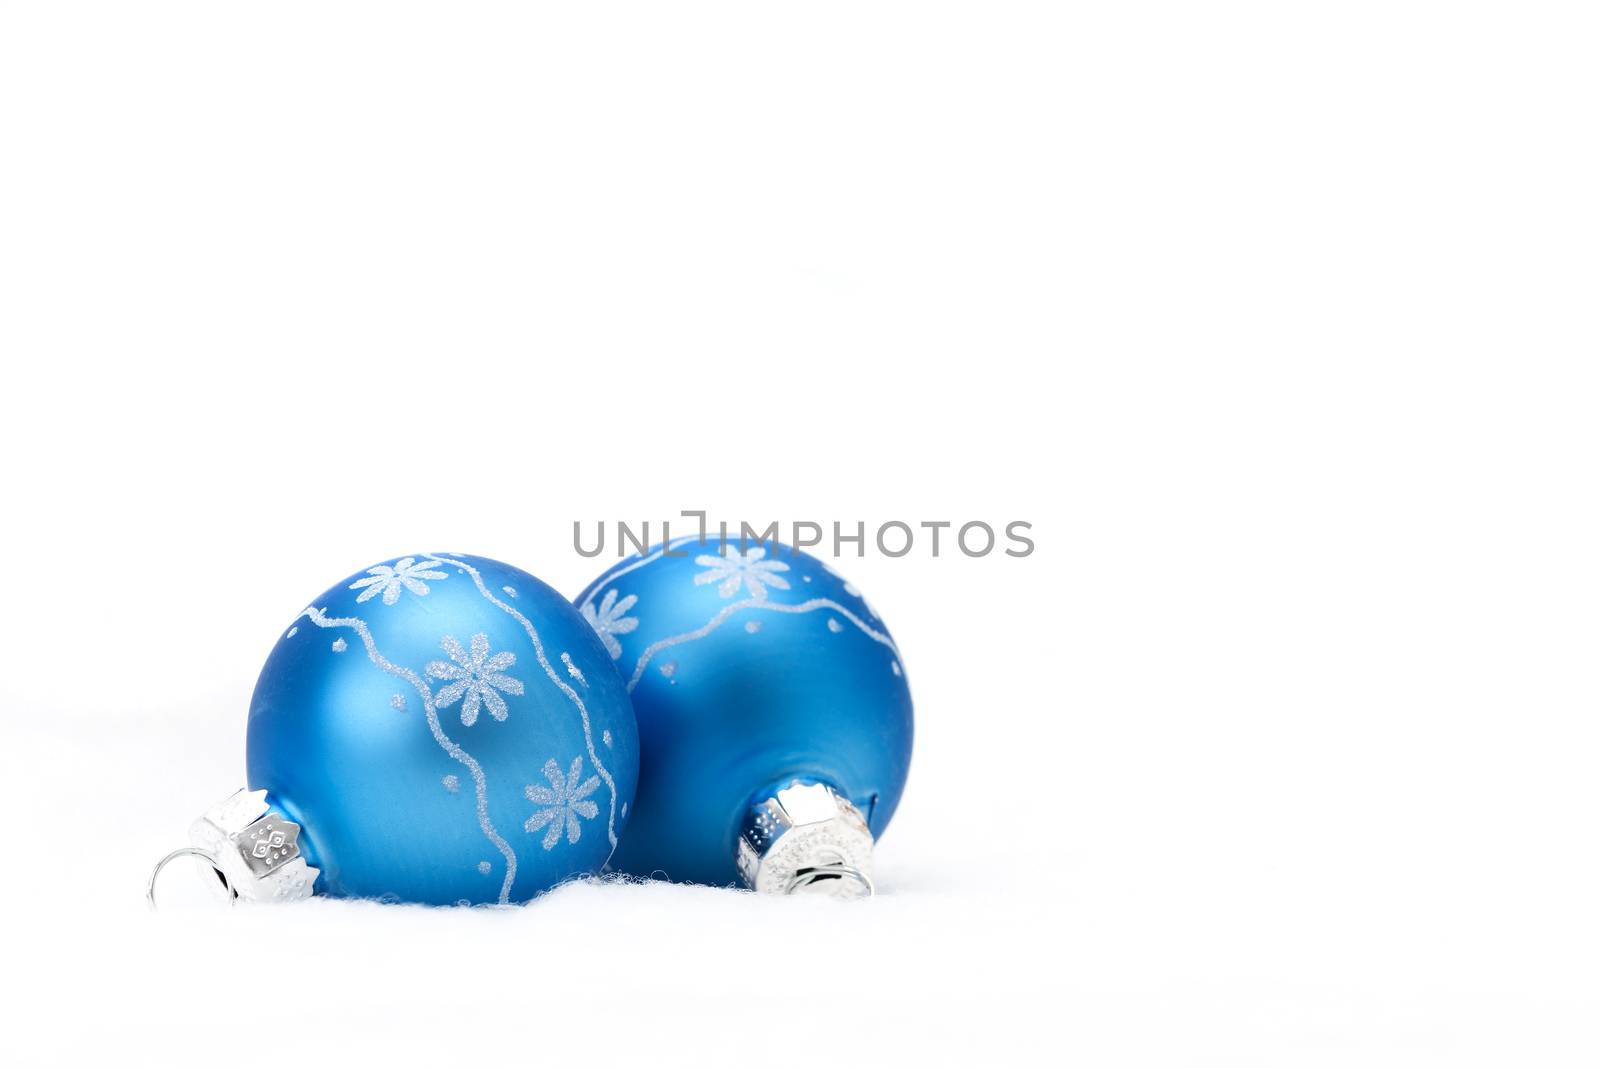 Two blue glass christmas balls with a snowflake motif.